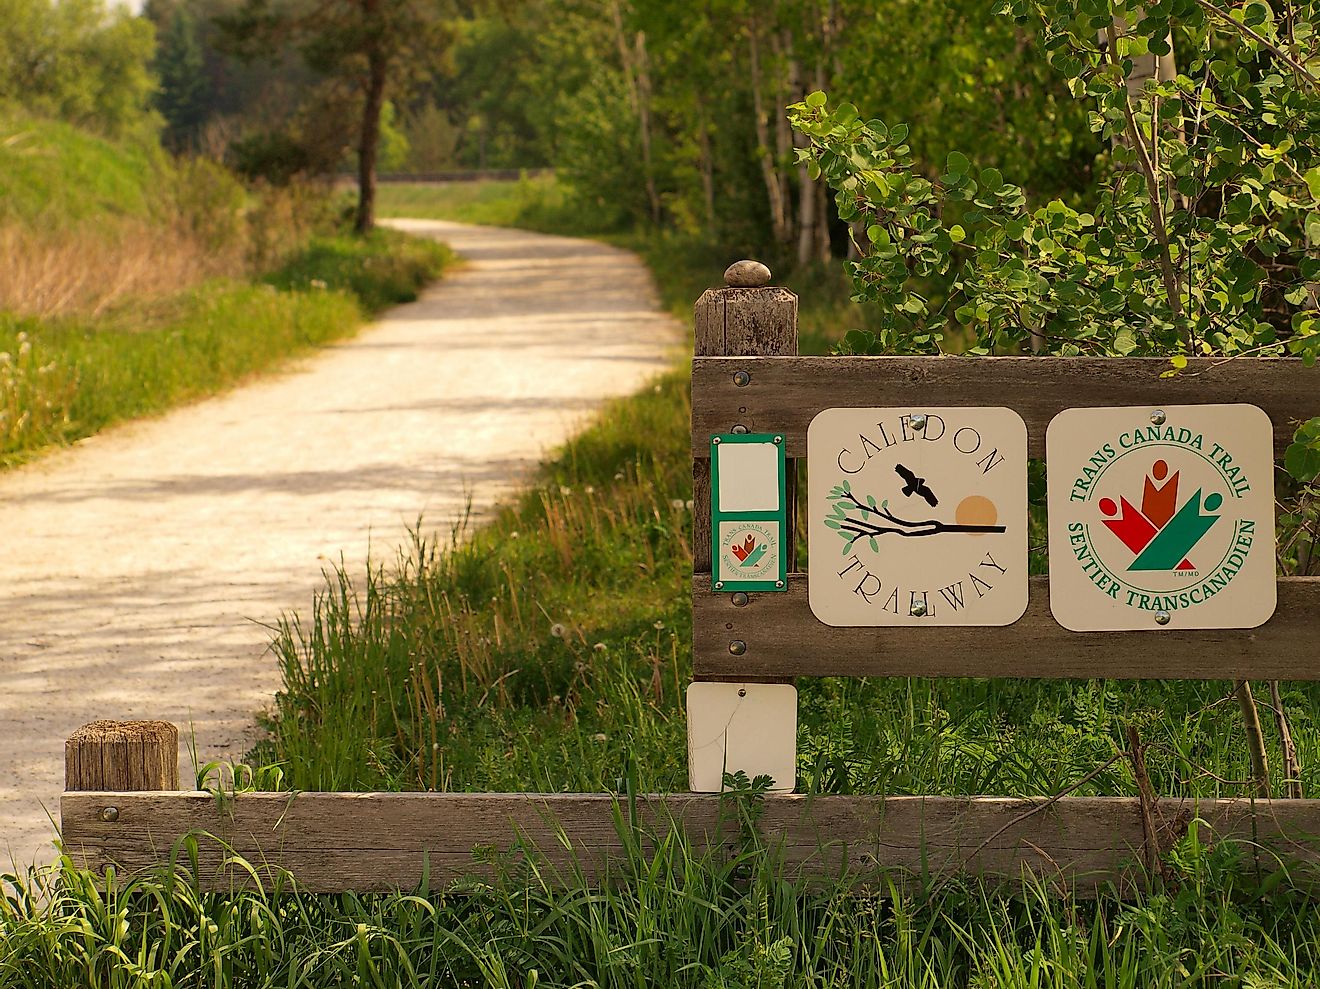 The Trans Canada Trail, the longest hiking trail in the world.